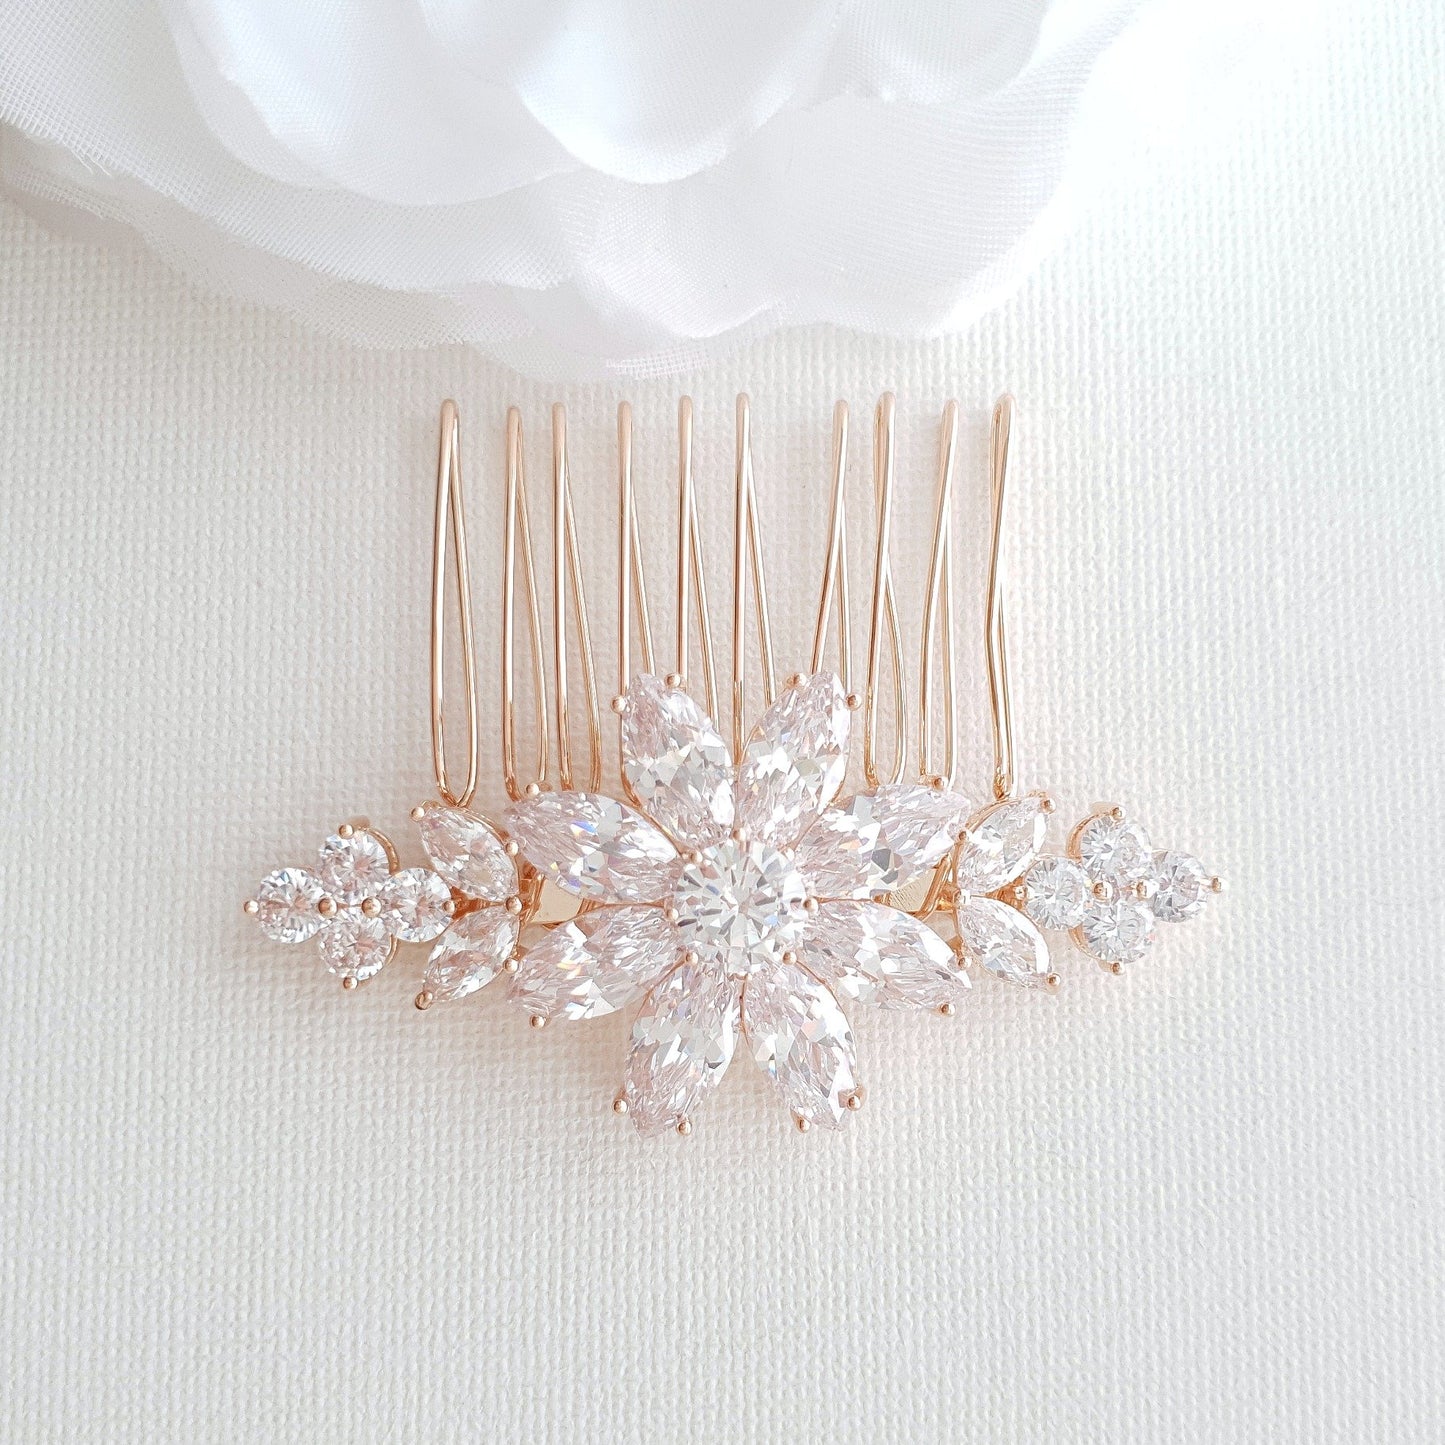 Rose Gold Hair Comb in Flower Design-Daisy - PoetryDesigns